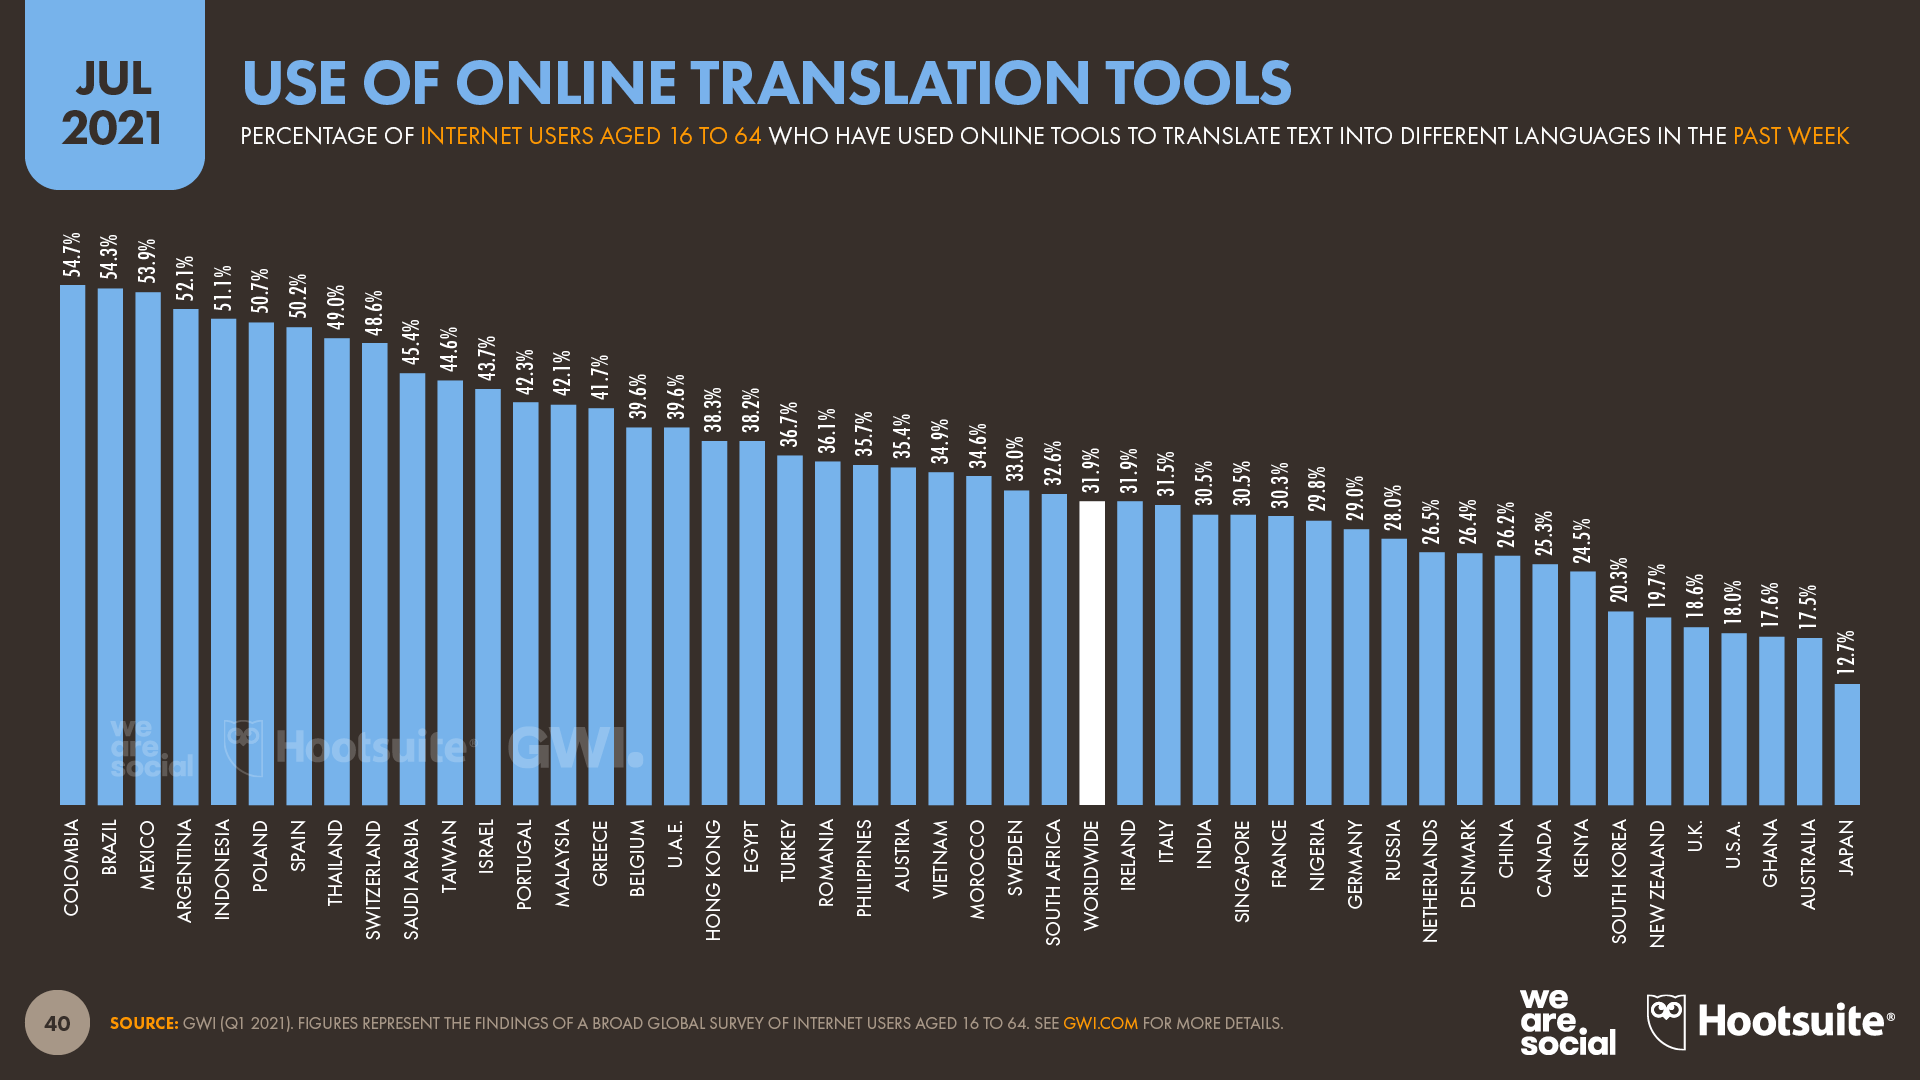 chart showing use of online translation tools as of July 2021